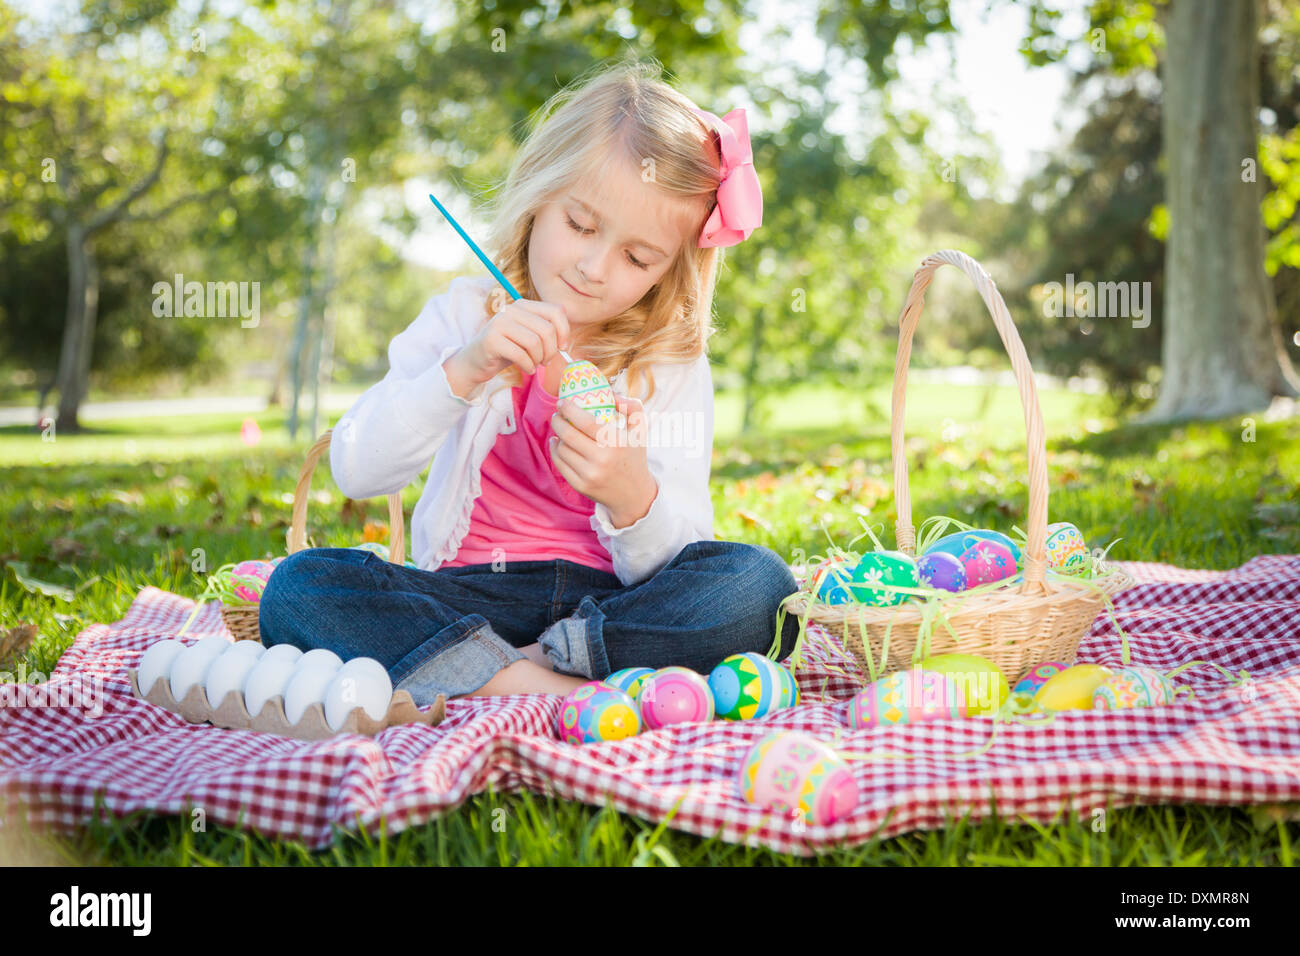 Cute Young Girl Happily Coloring Her Easter Eggs with Paint Brush in the Park. Stock Photo